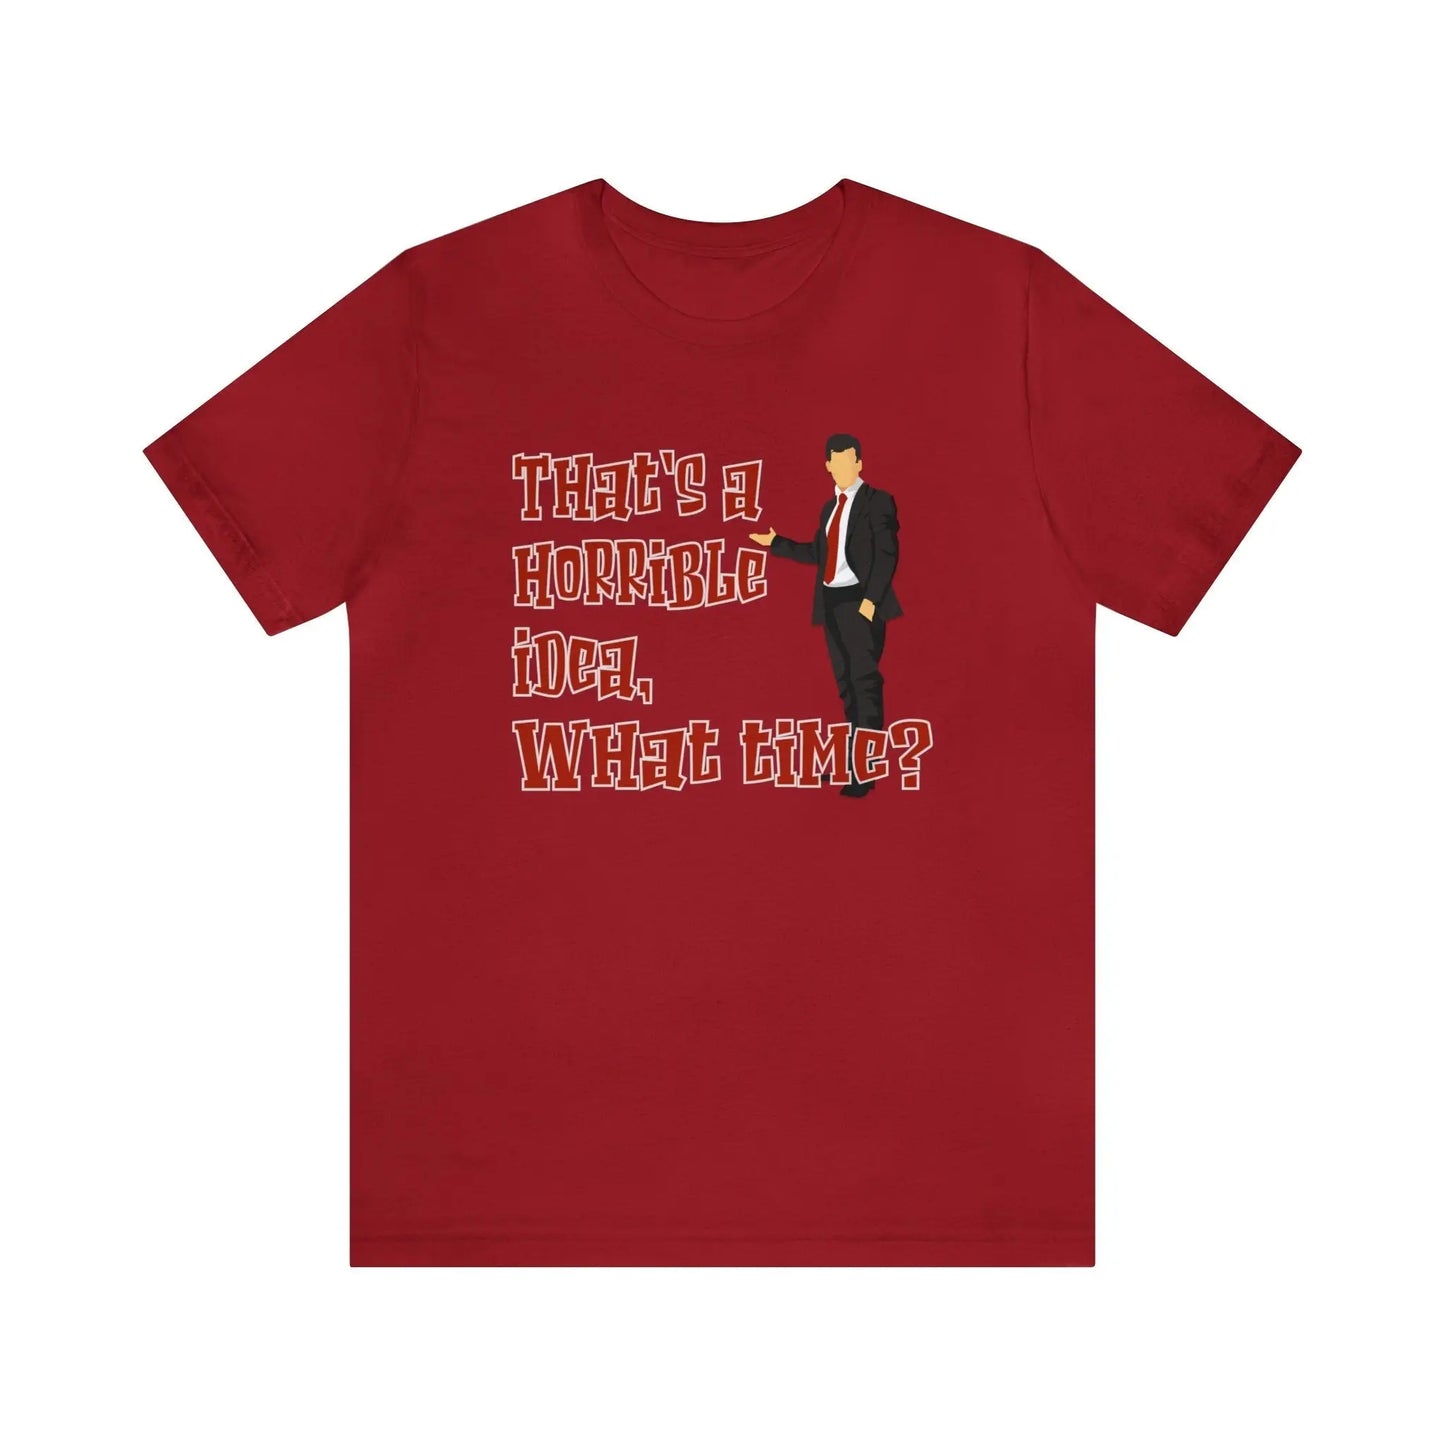 That's A Horrible Idea What Time Men's Tee - Wicked Tees